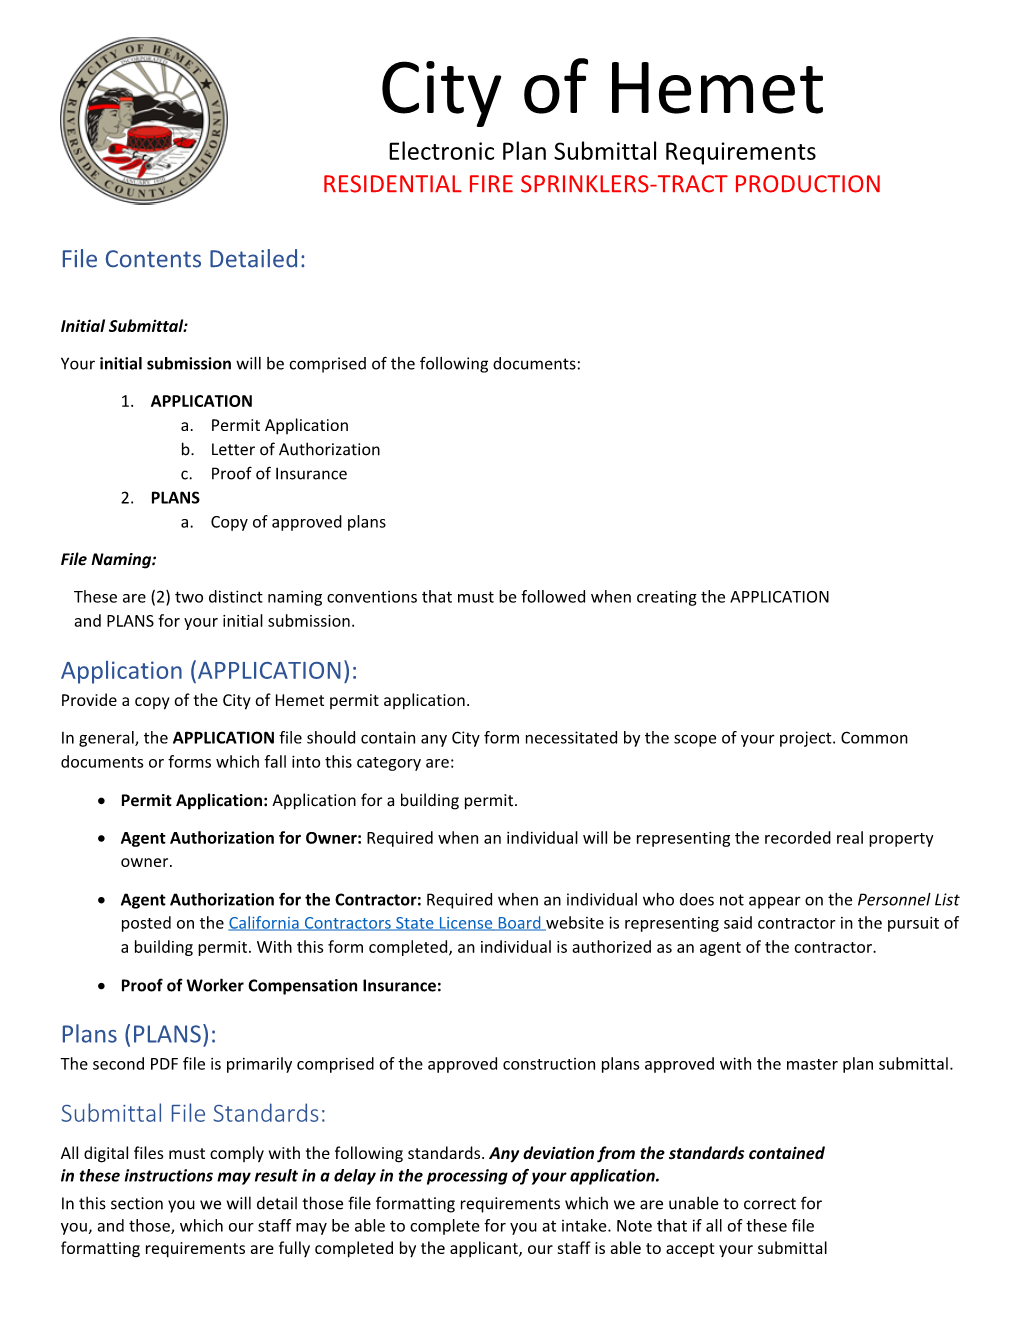 Electronic Plan Submittal Requirements RESIDENTIAL FIRE SPRINKLERS-TRACT PRODUCTION